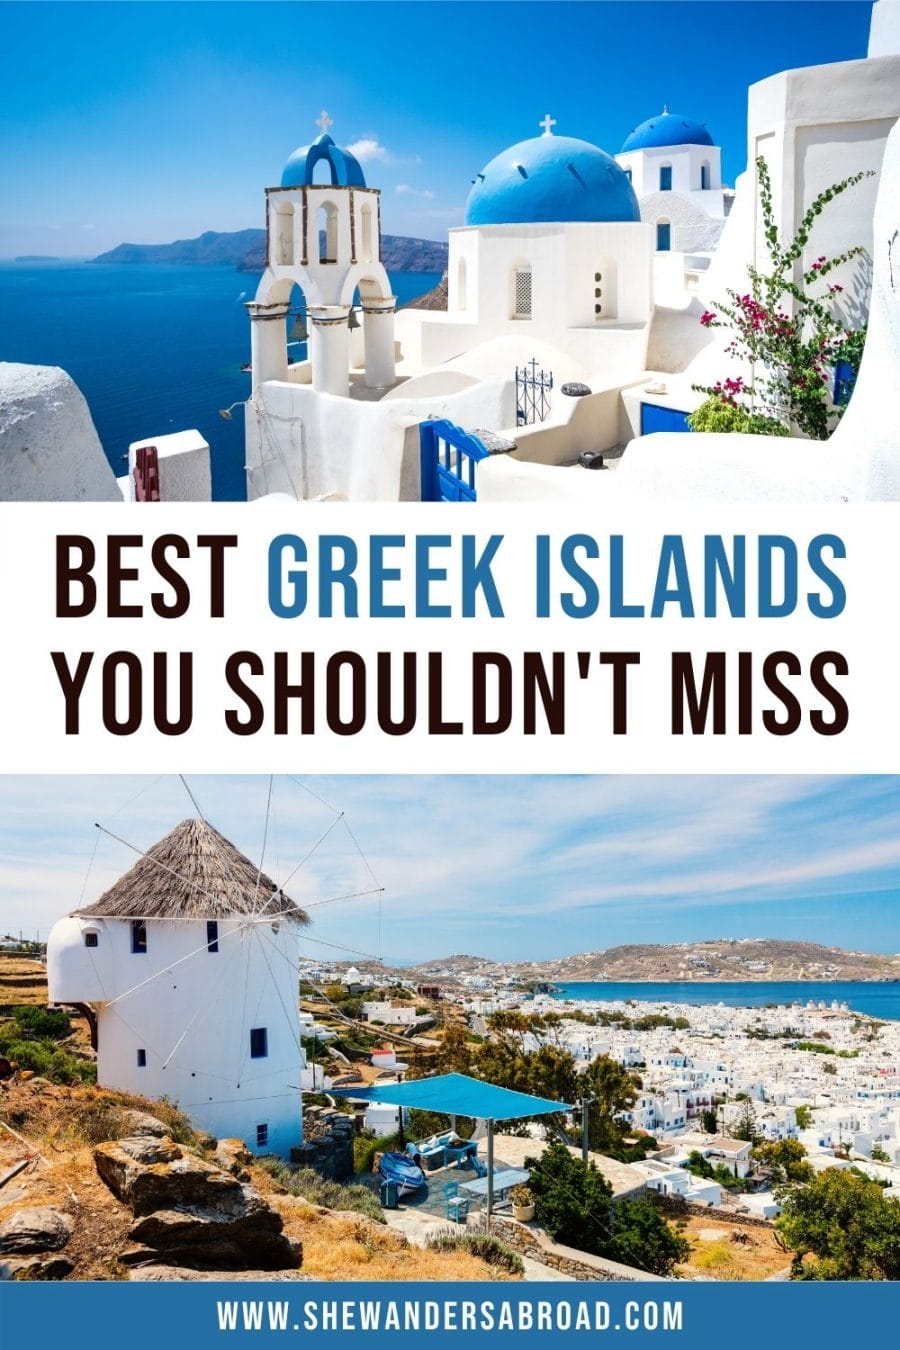 Most beautiful islands in Greece You Can't Miss